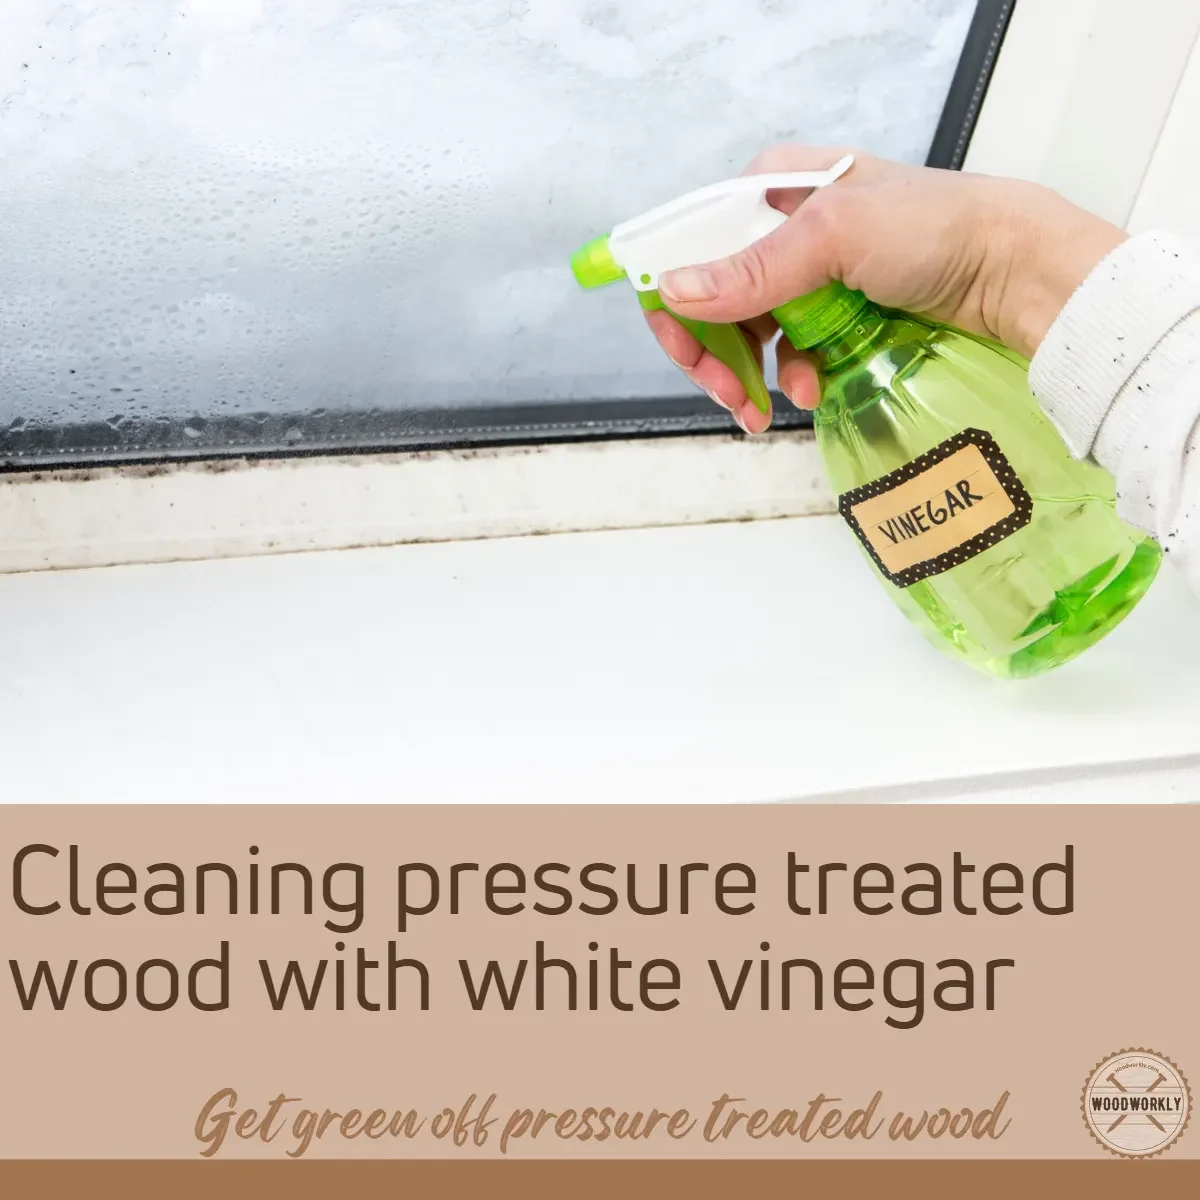 Cleaning pressure treated wood with white vinegar